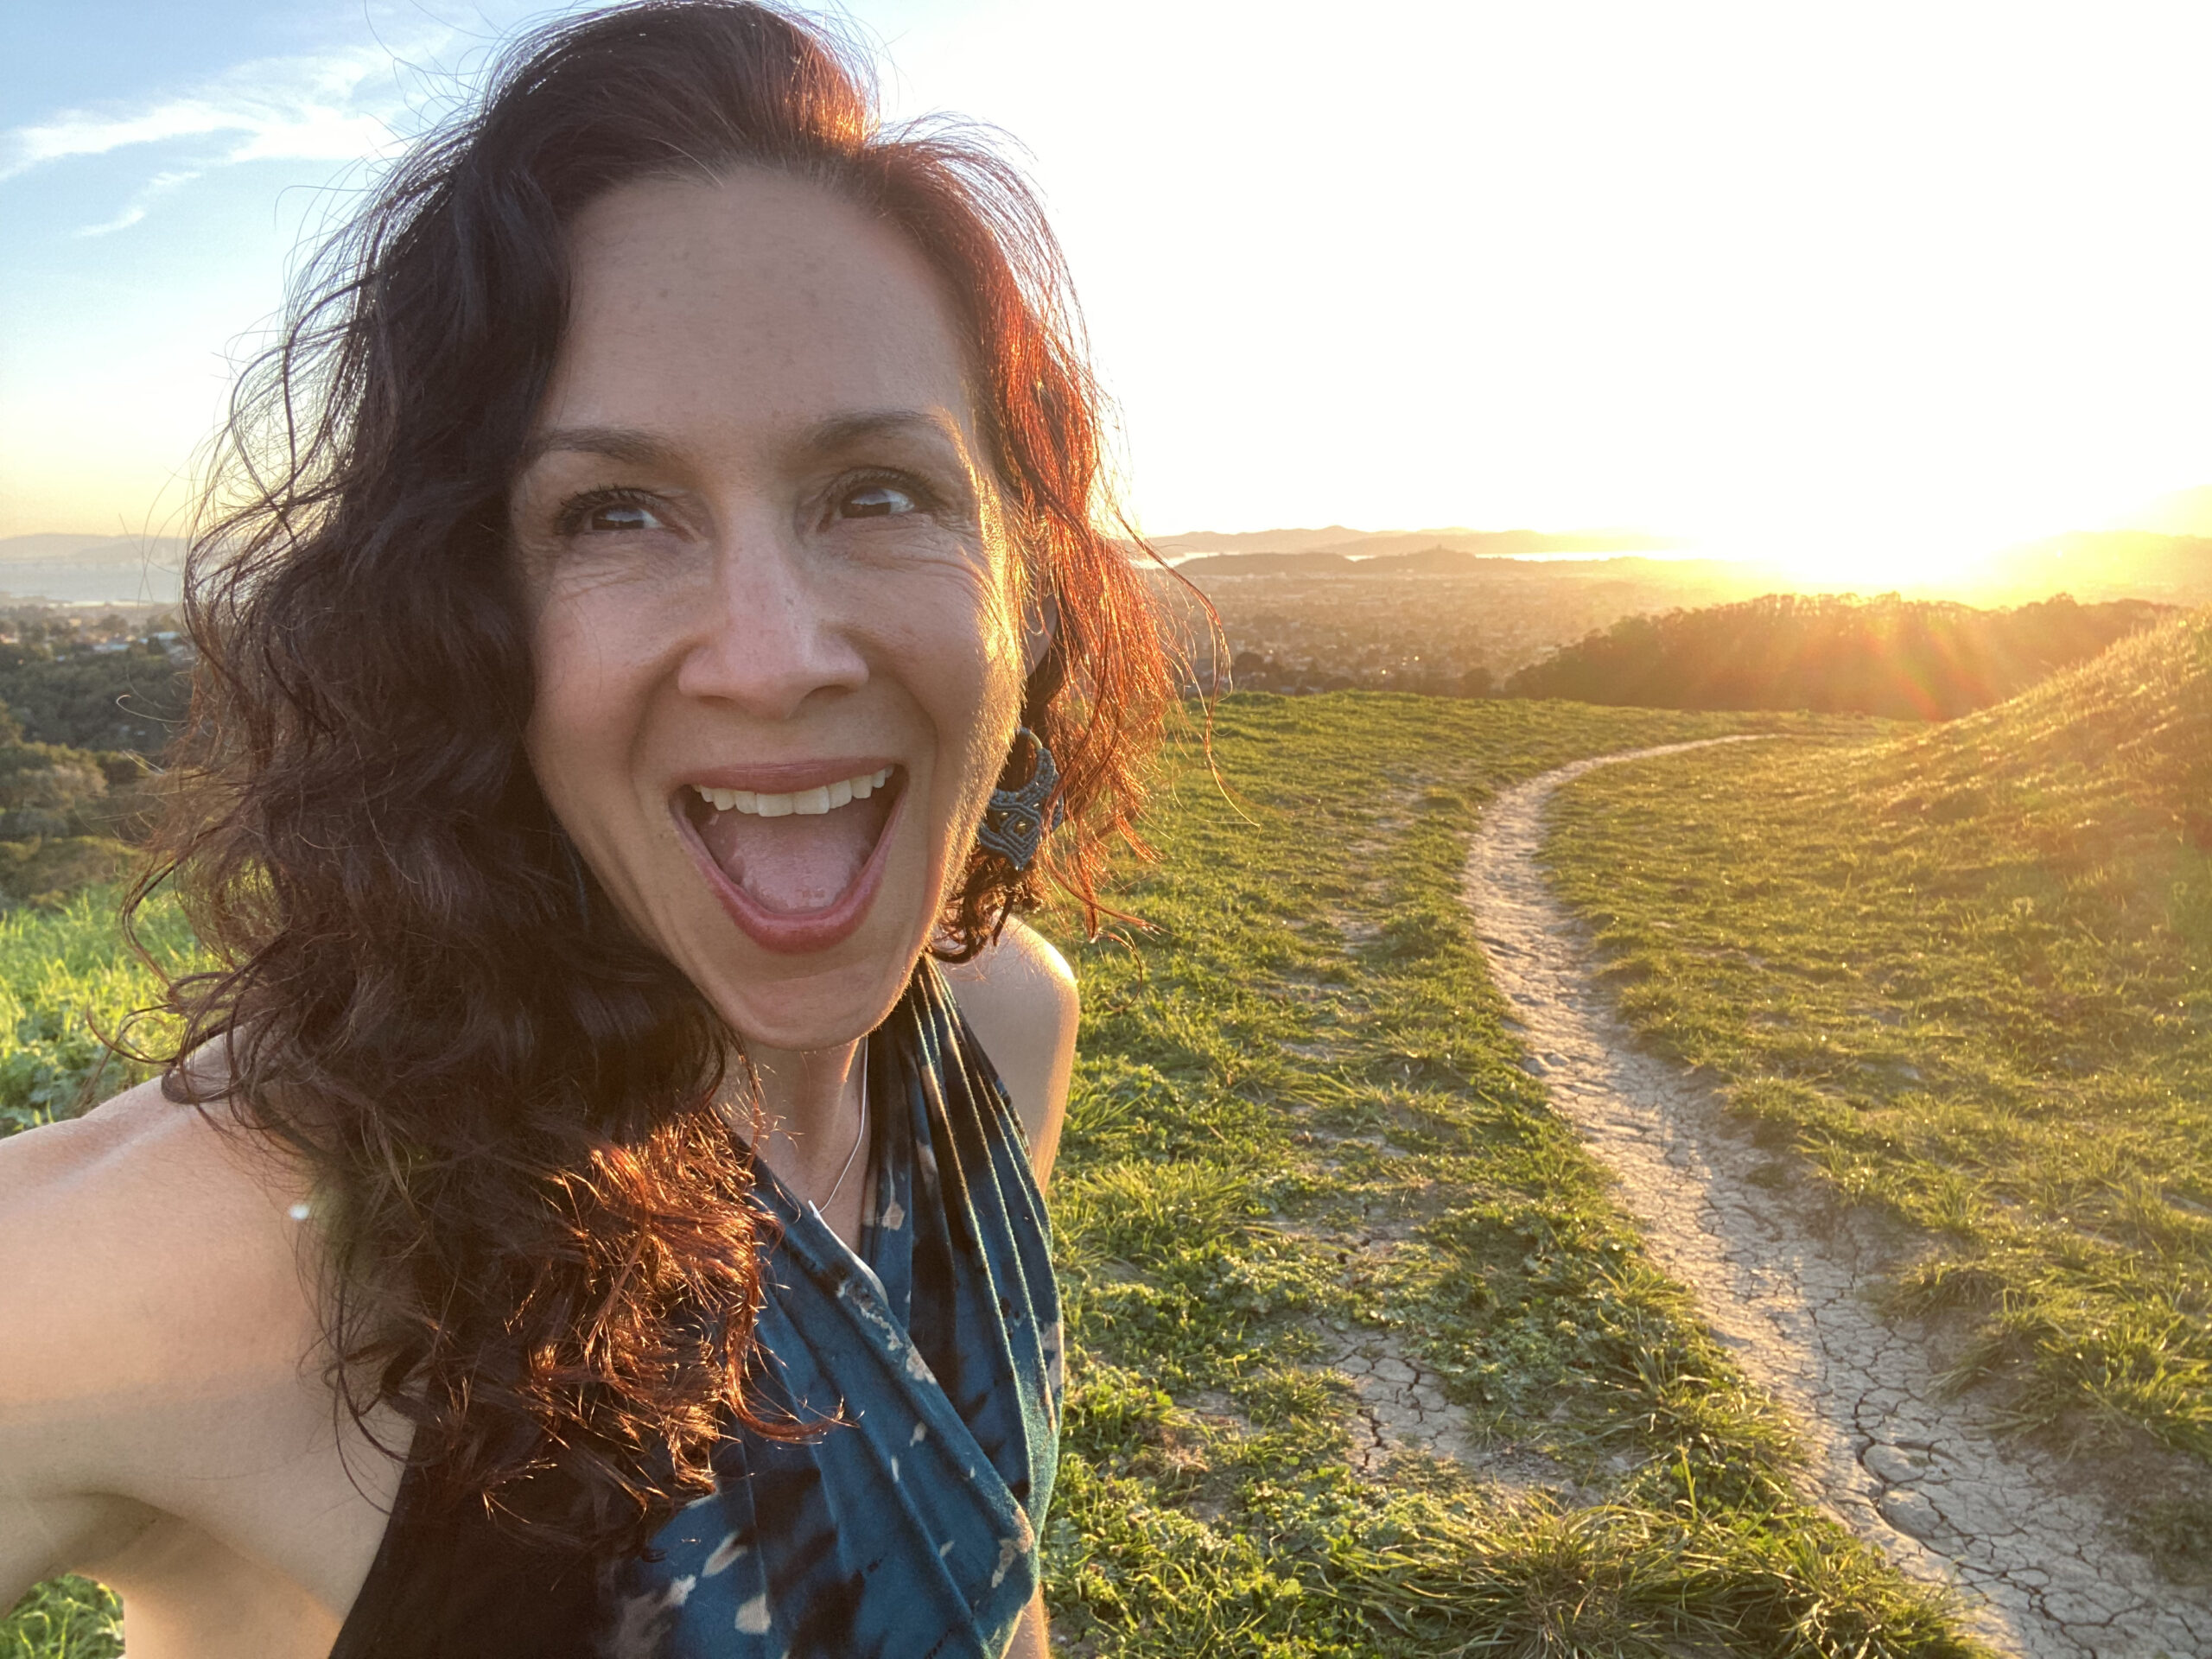 Lun in the field at sunset, smiling in a blue dress